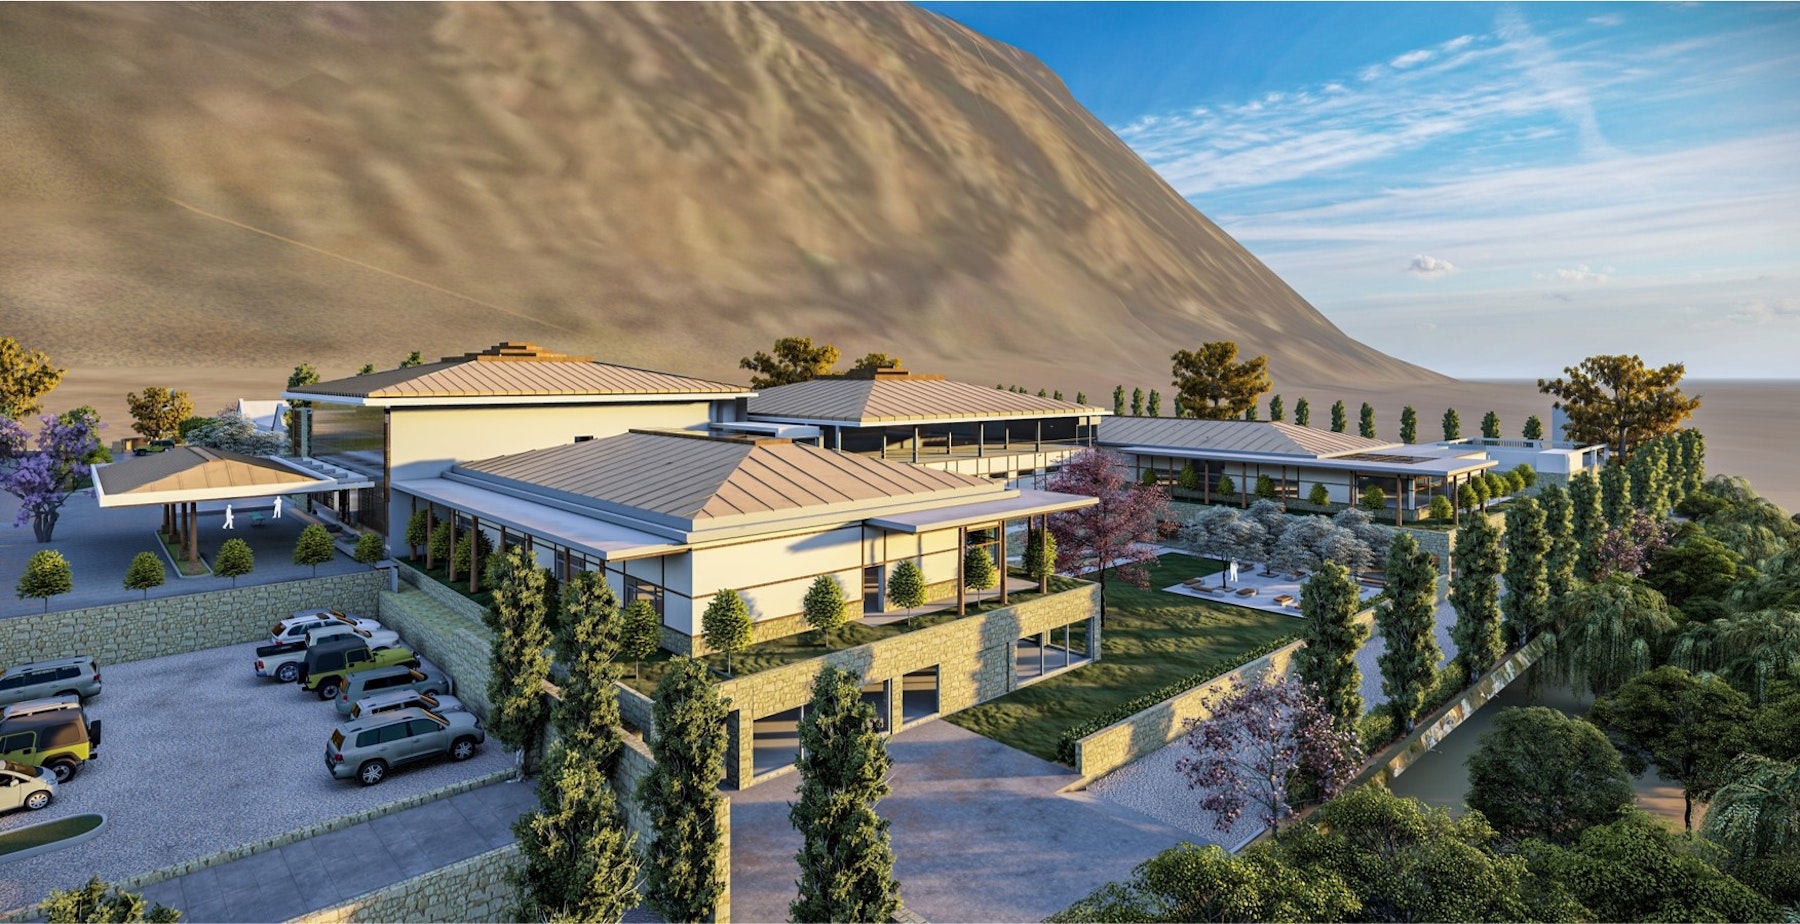 The Aga Khan Medical Centre in Gilgit will be transformed into a fully functional general hospital by 2023. | AKDN